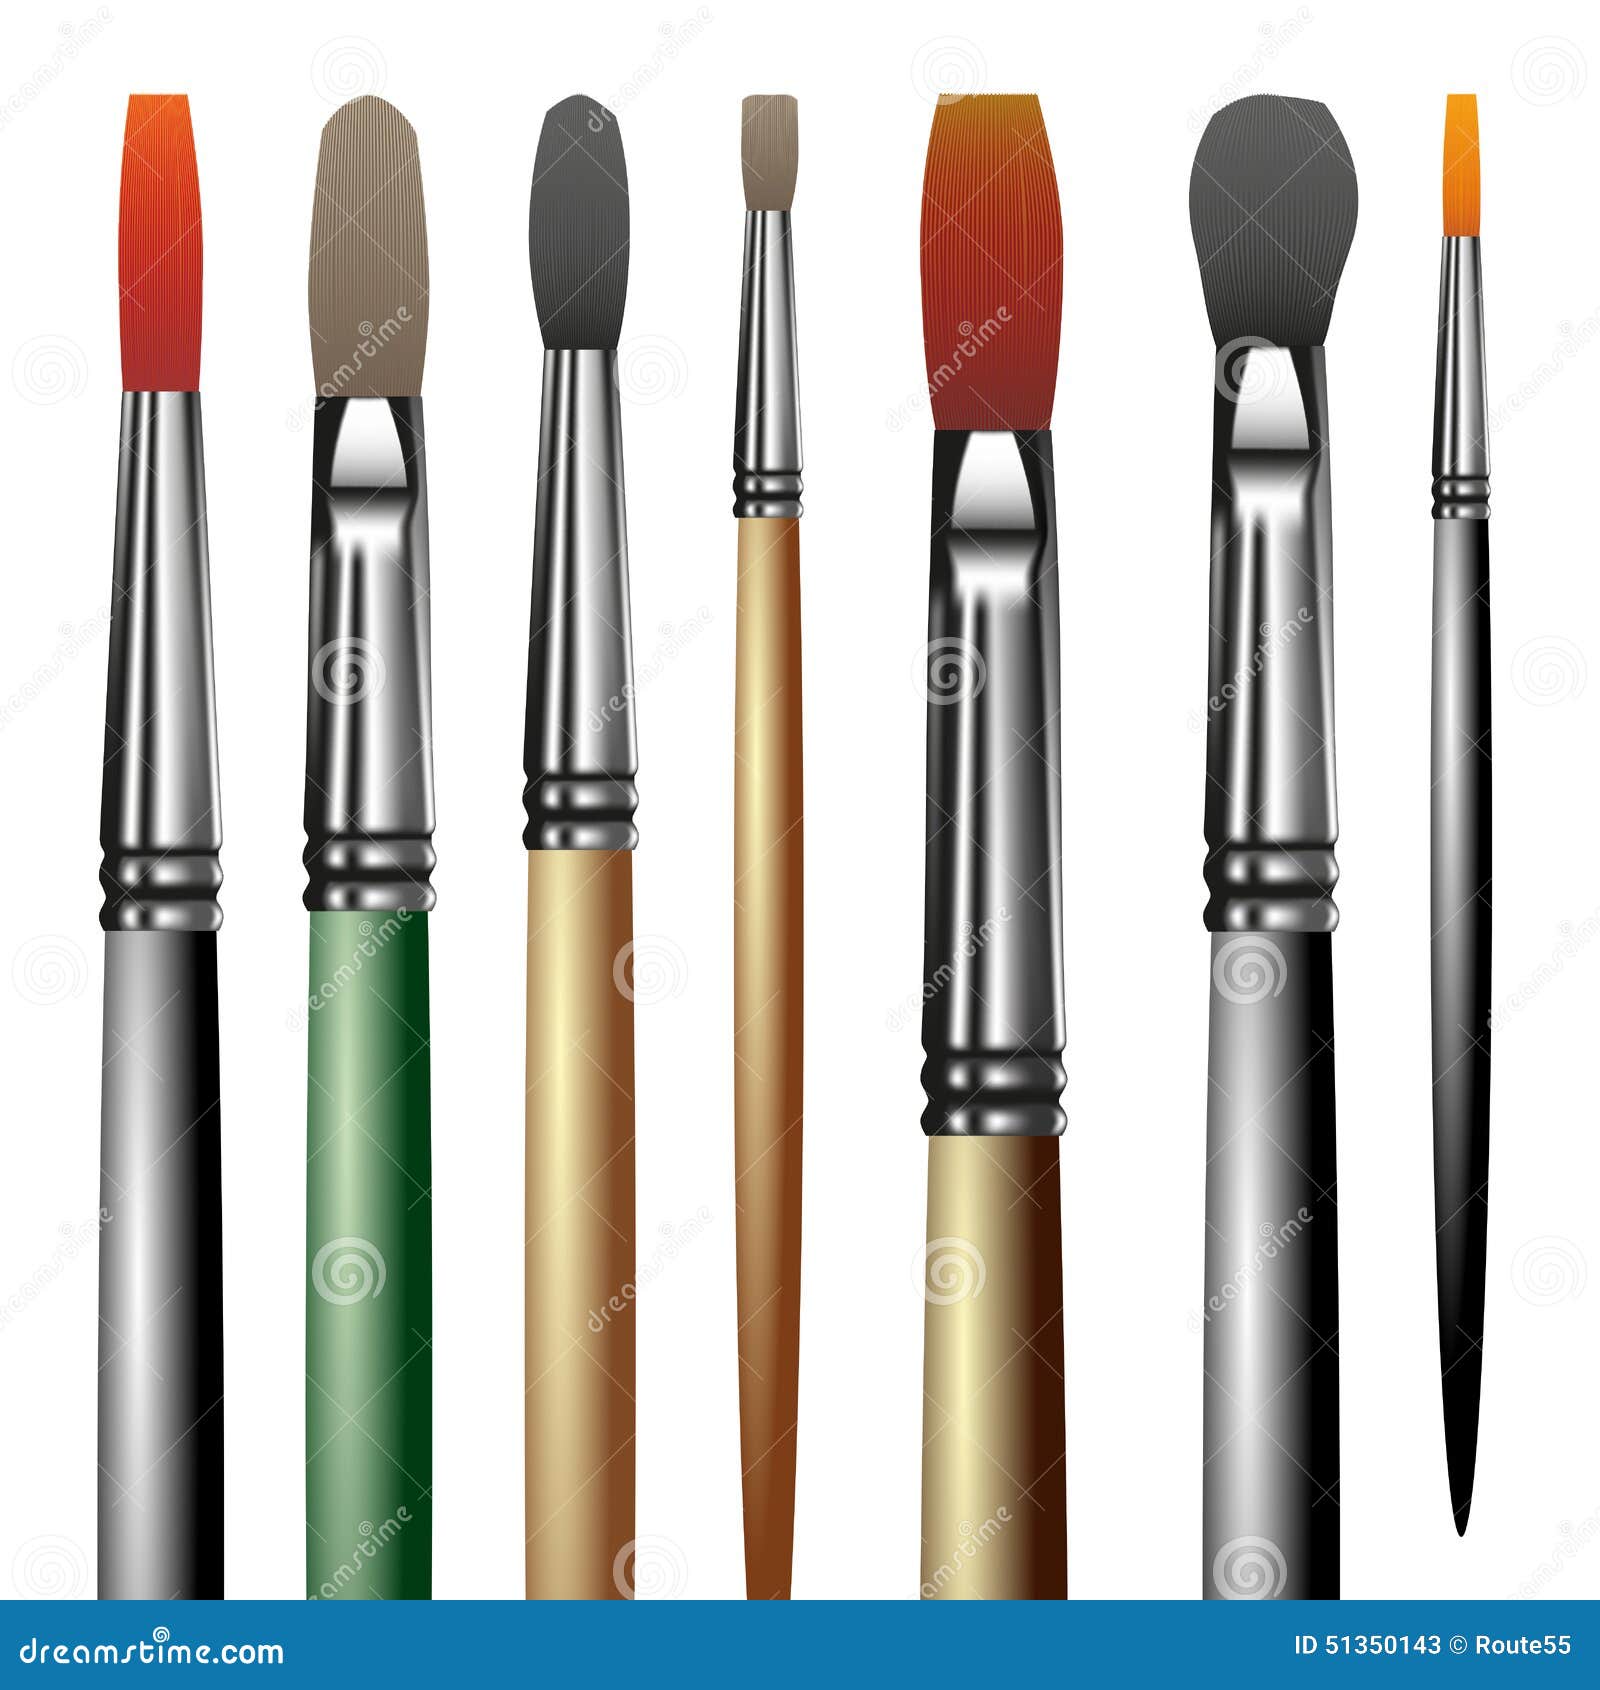 Artistic paint brushes stock vector. Illustration of creativity - 51350143